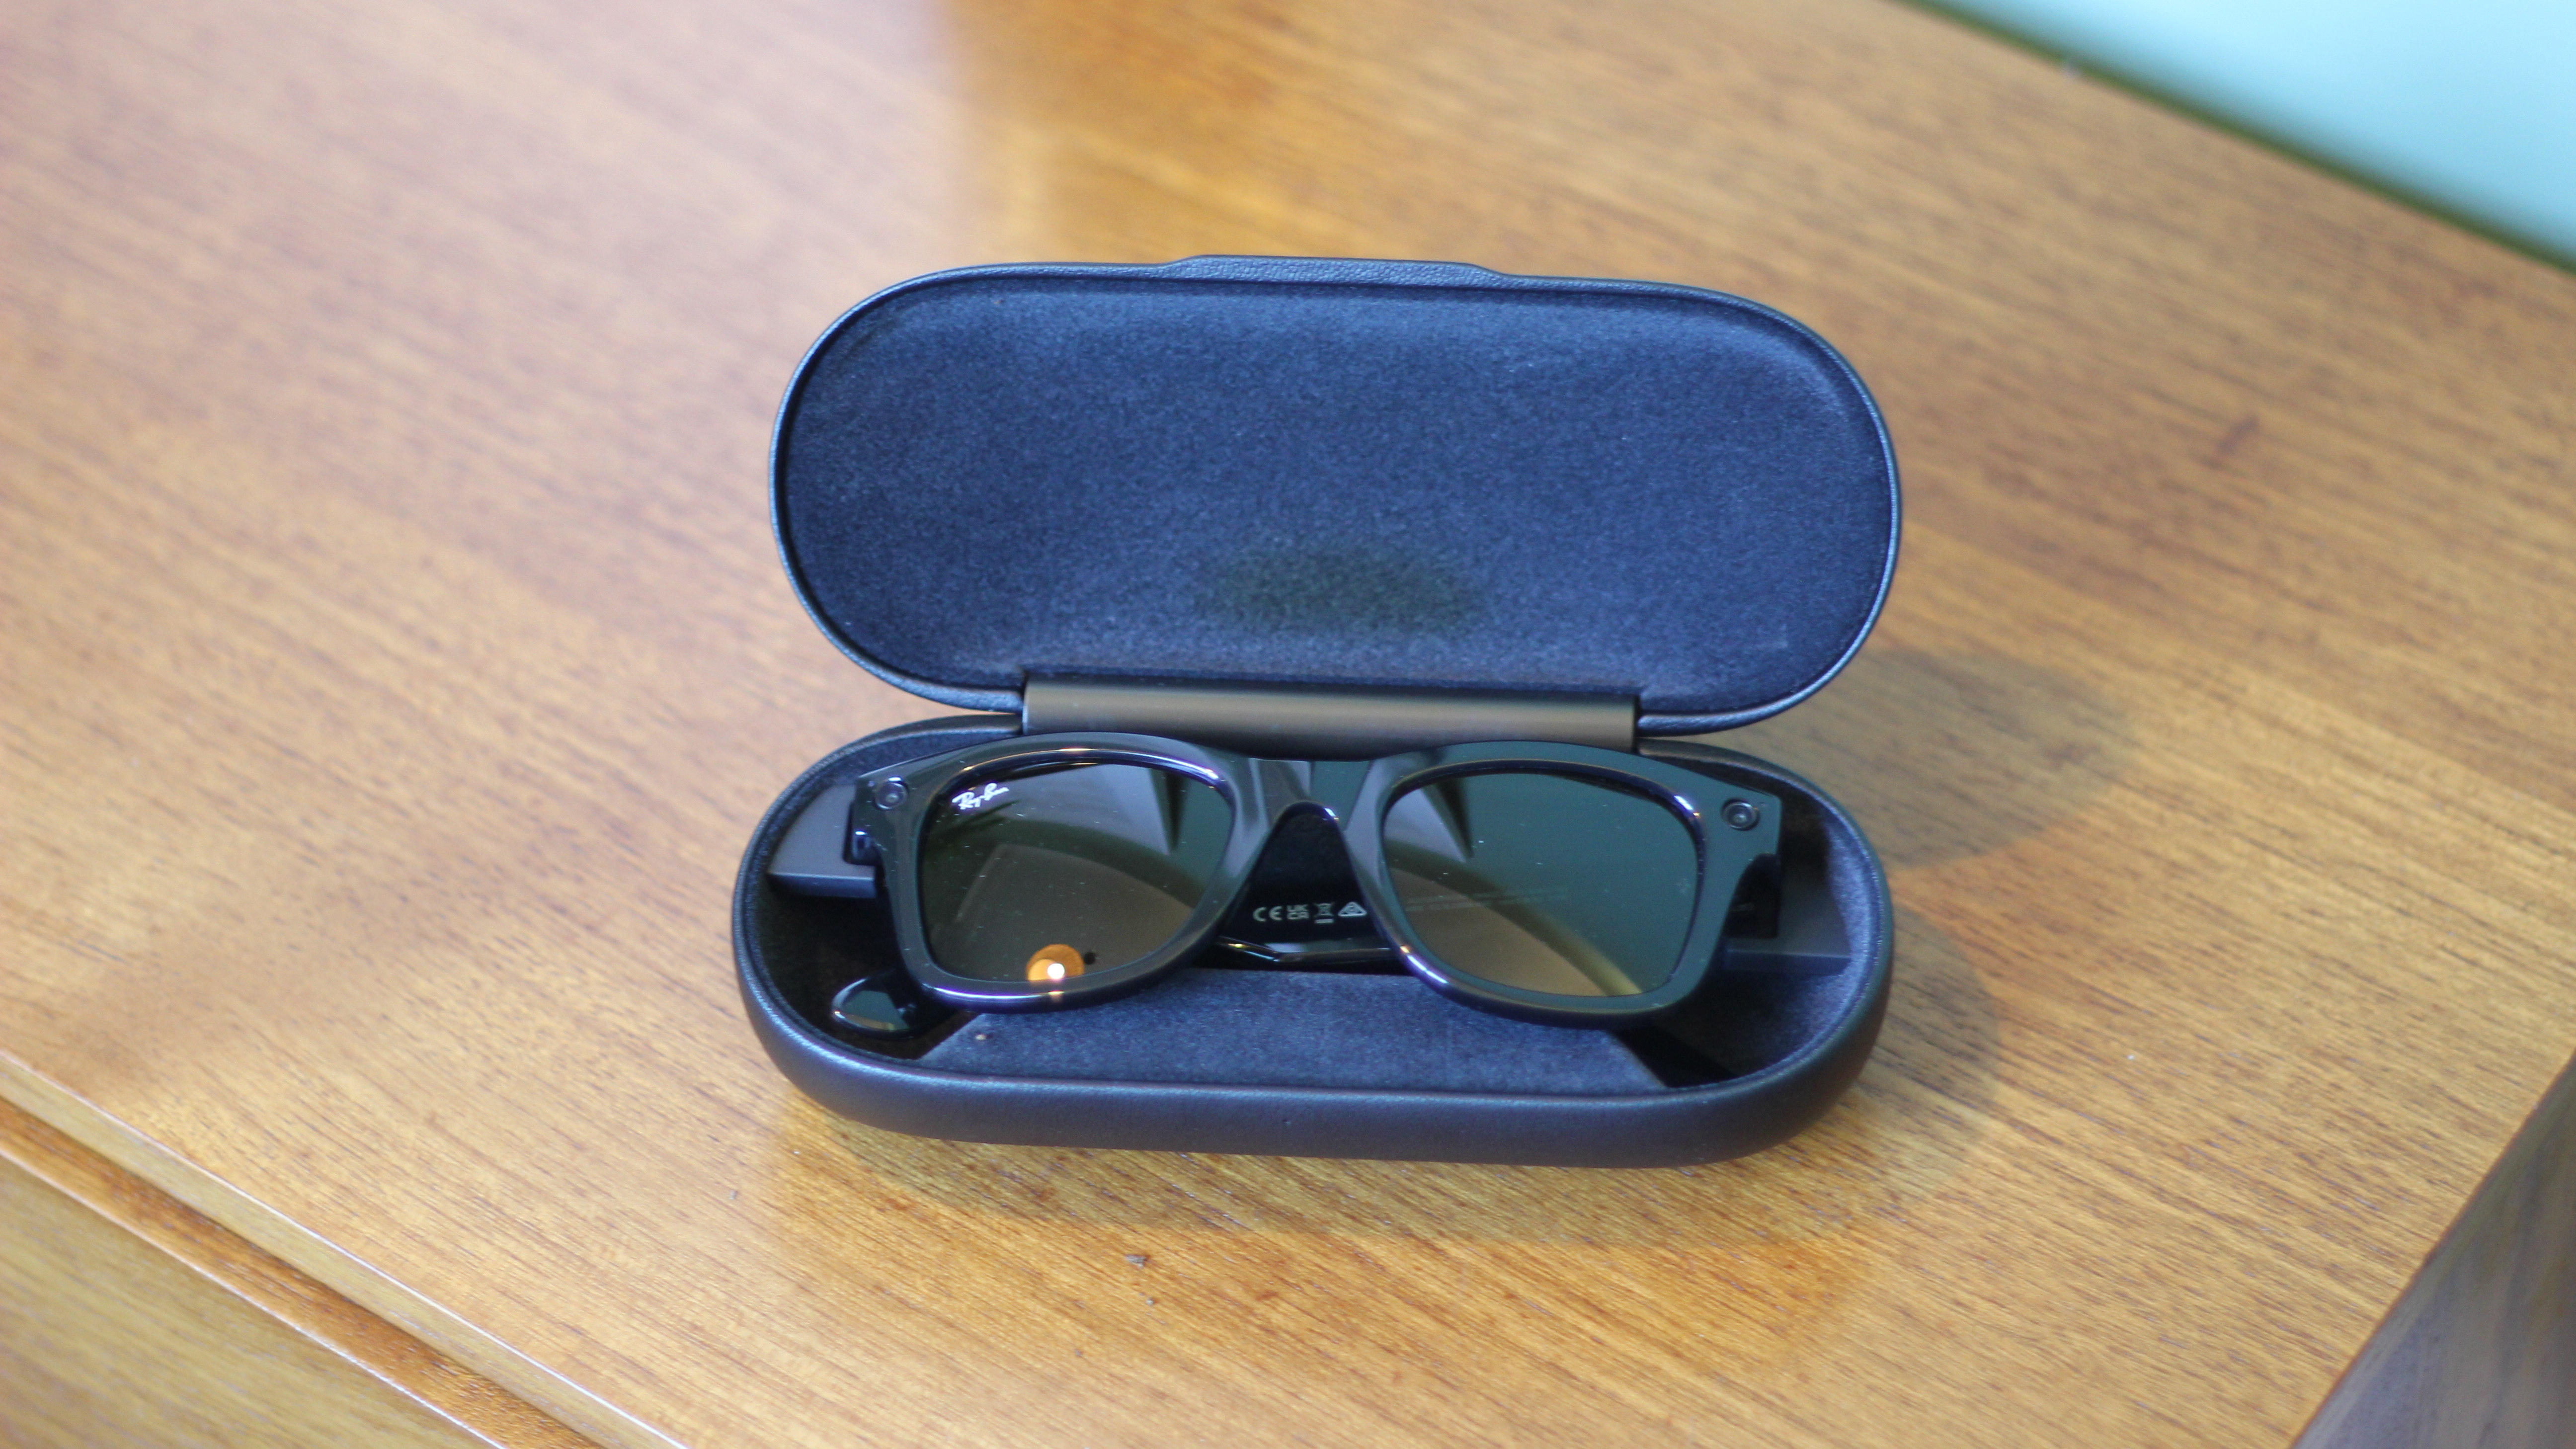 Unforgettable Messy Ideal Ray-Ban Stories smart glasses review | TechRadar